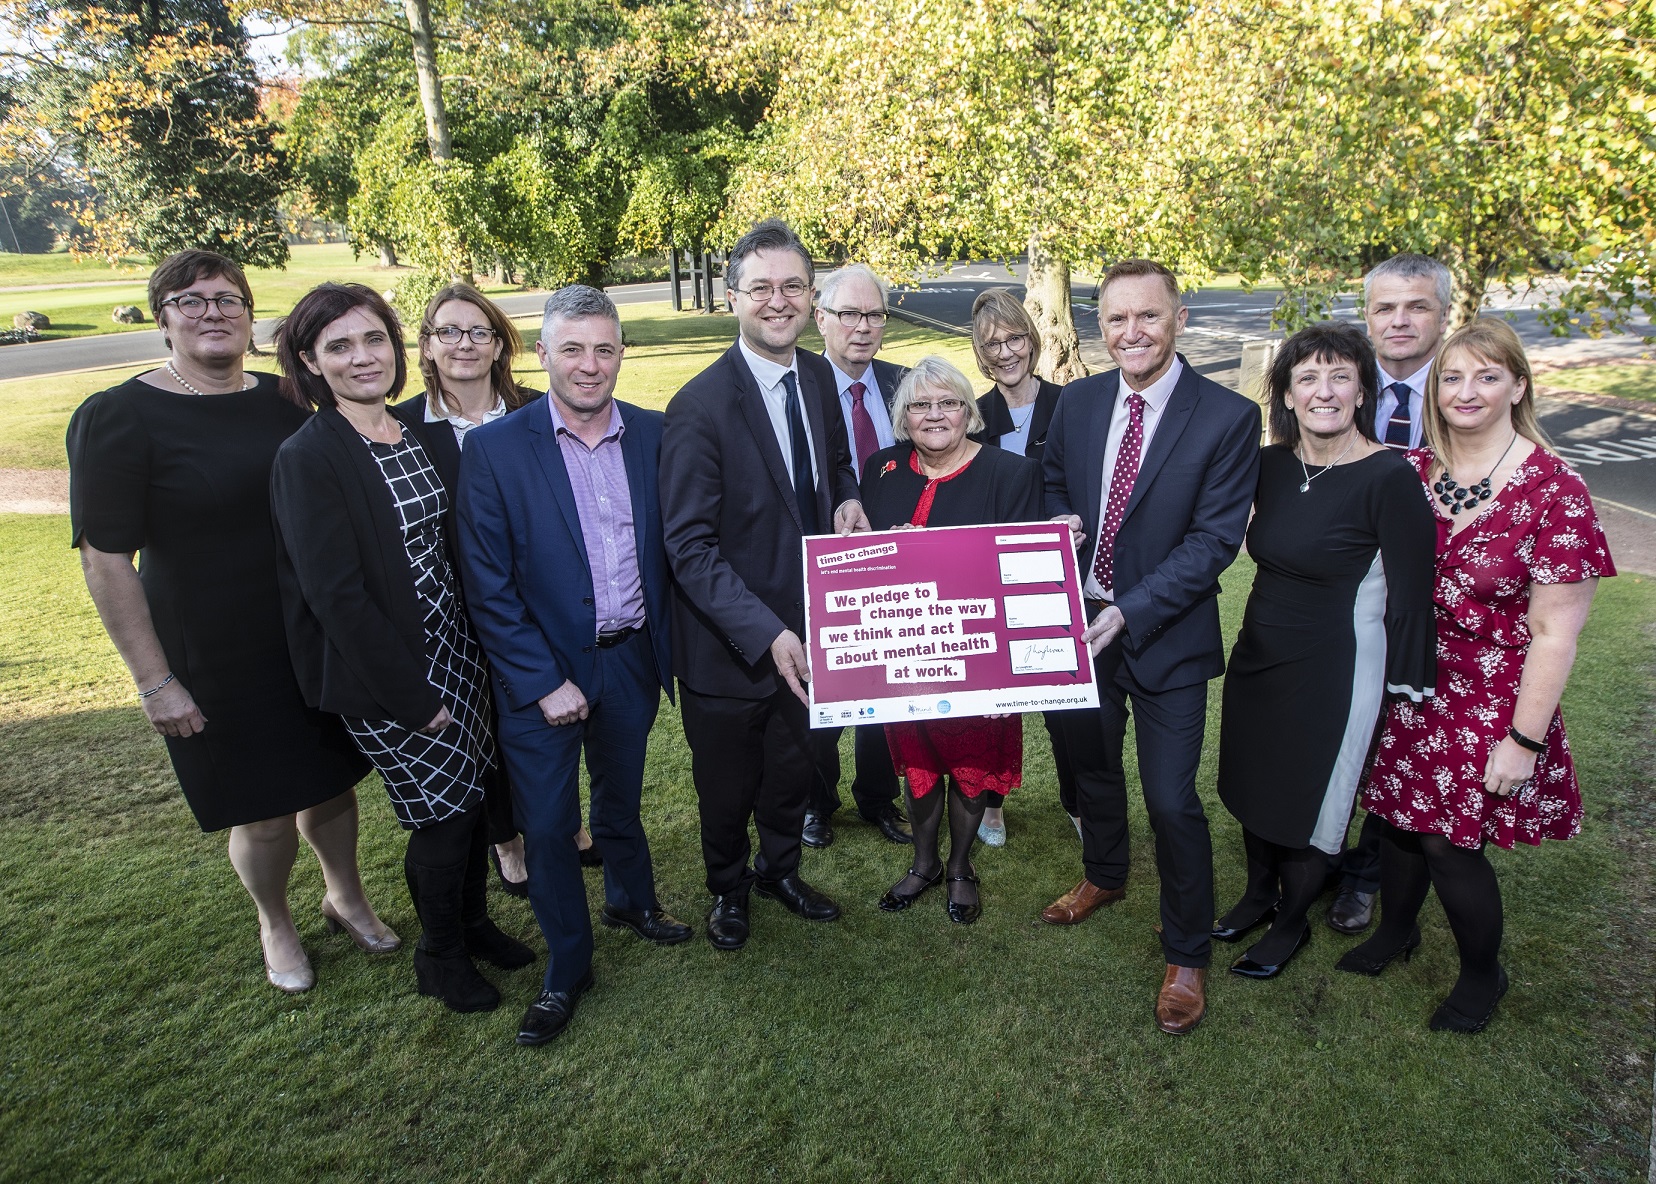 Mental Health Pledge Shows Commitment to Positive Change